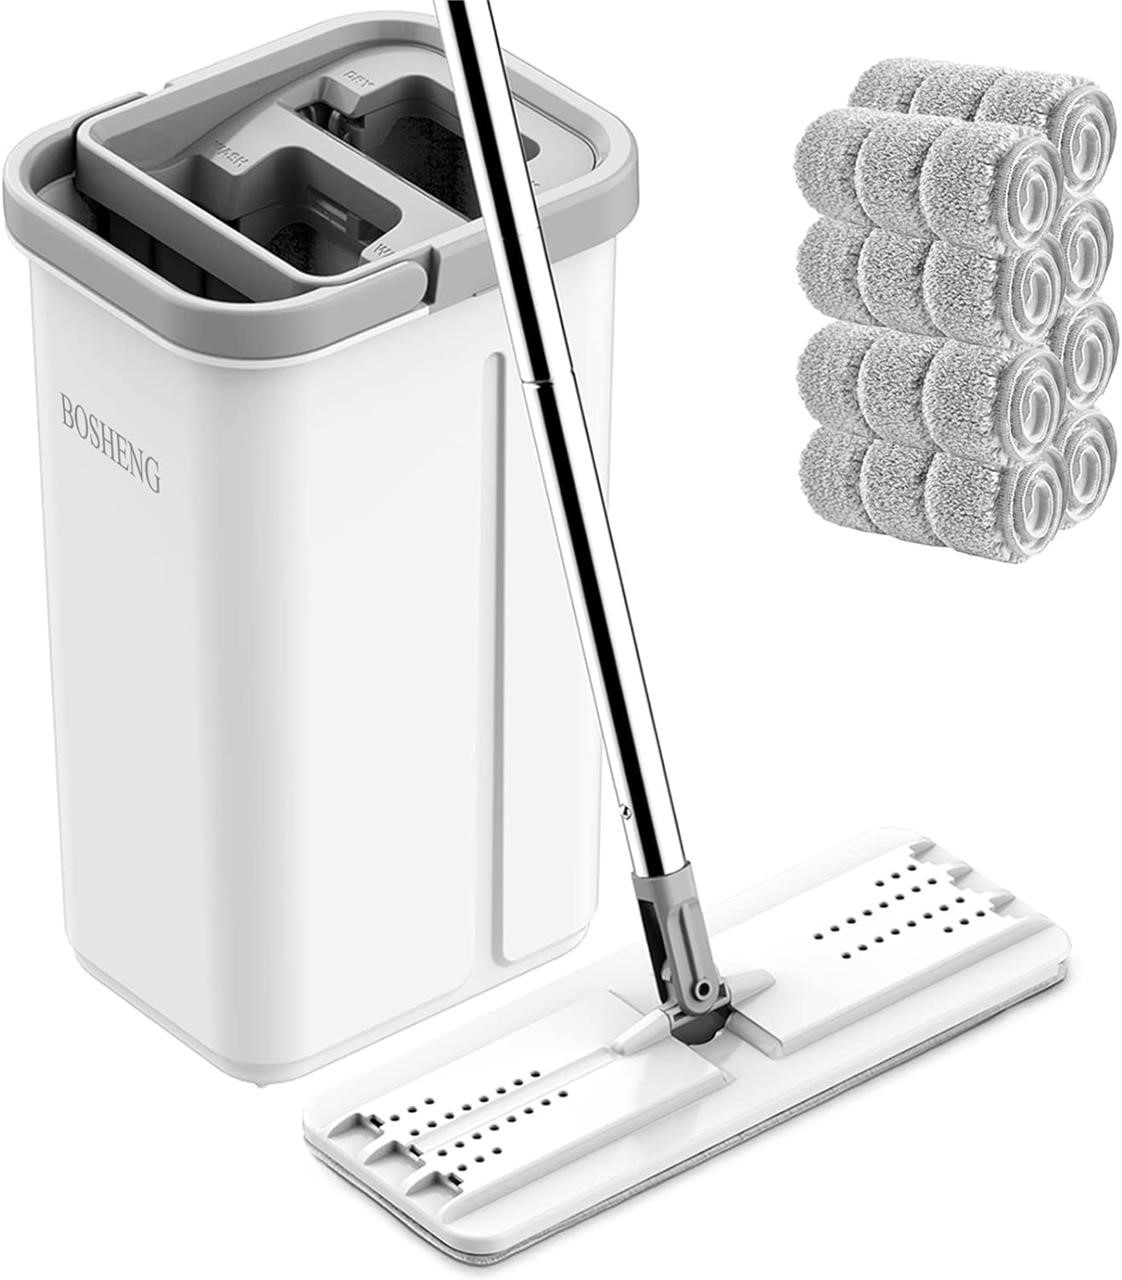 BOSHENG Mop and Bucket with Set, Hands Free